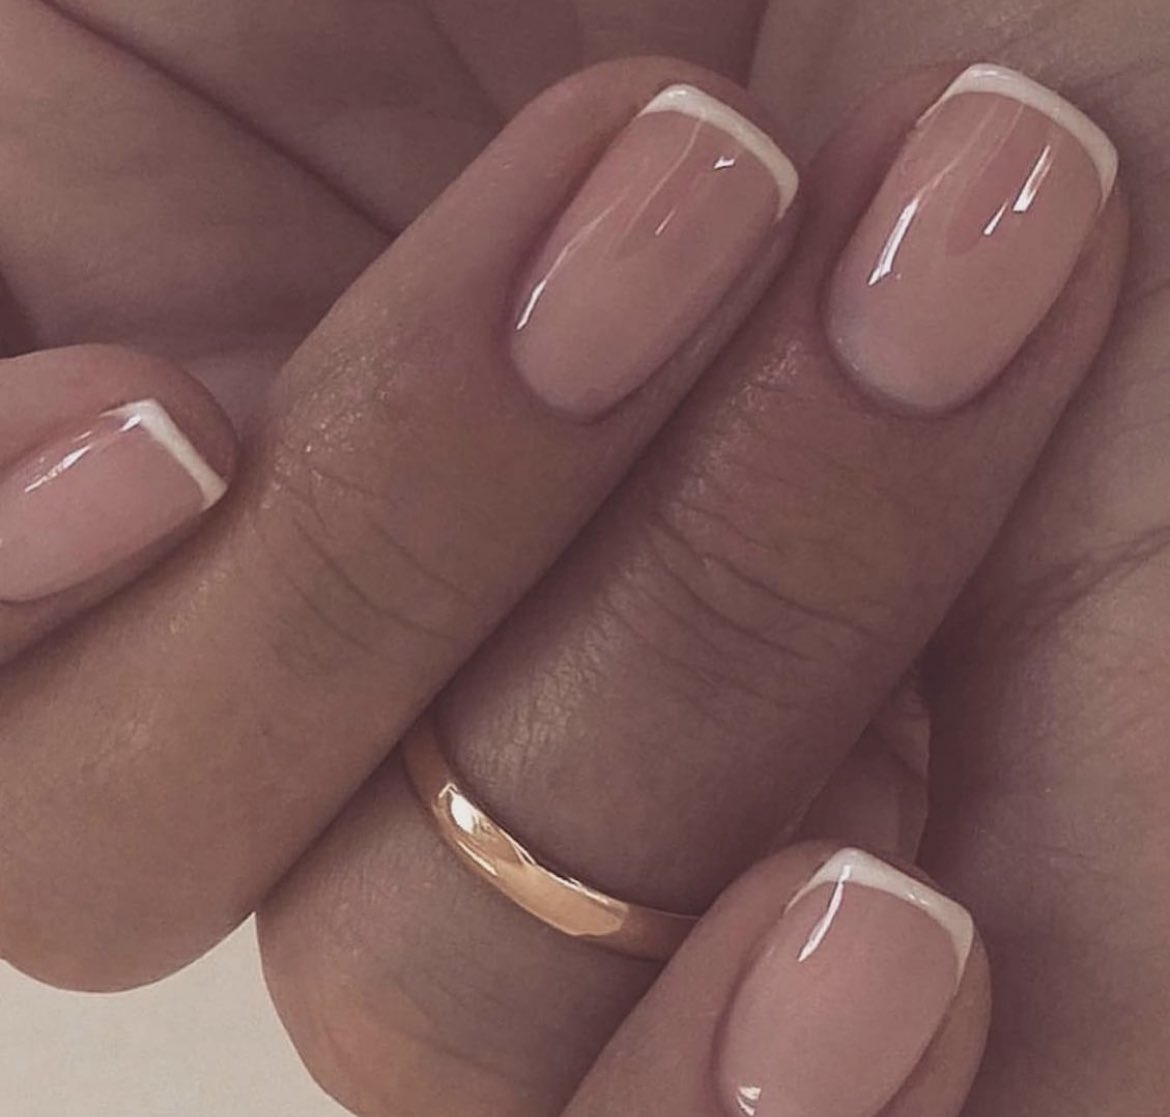 French Manicure 💅 #queensway #manicurelondon #manicure #gelmani #shellacnails #londonbeauty #bayswater #nails